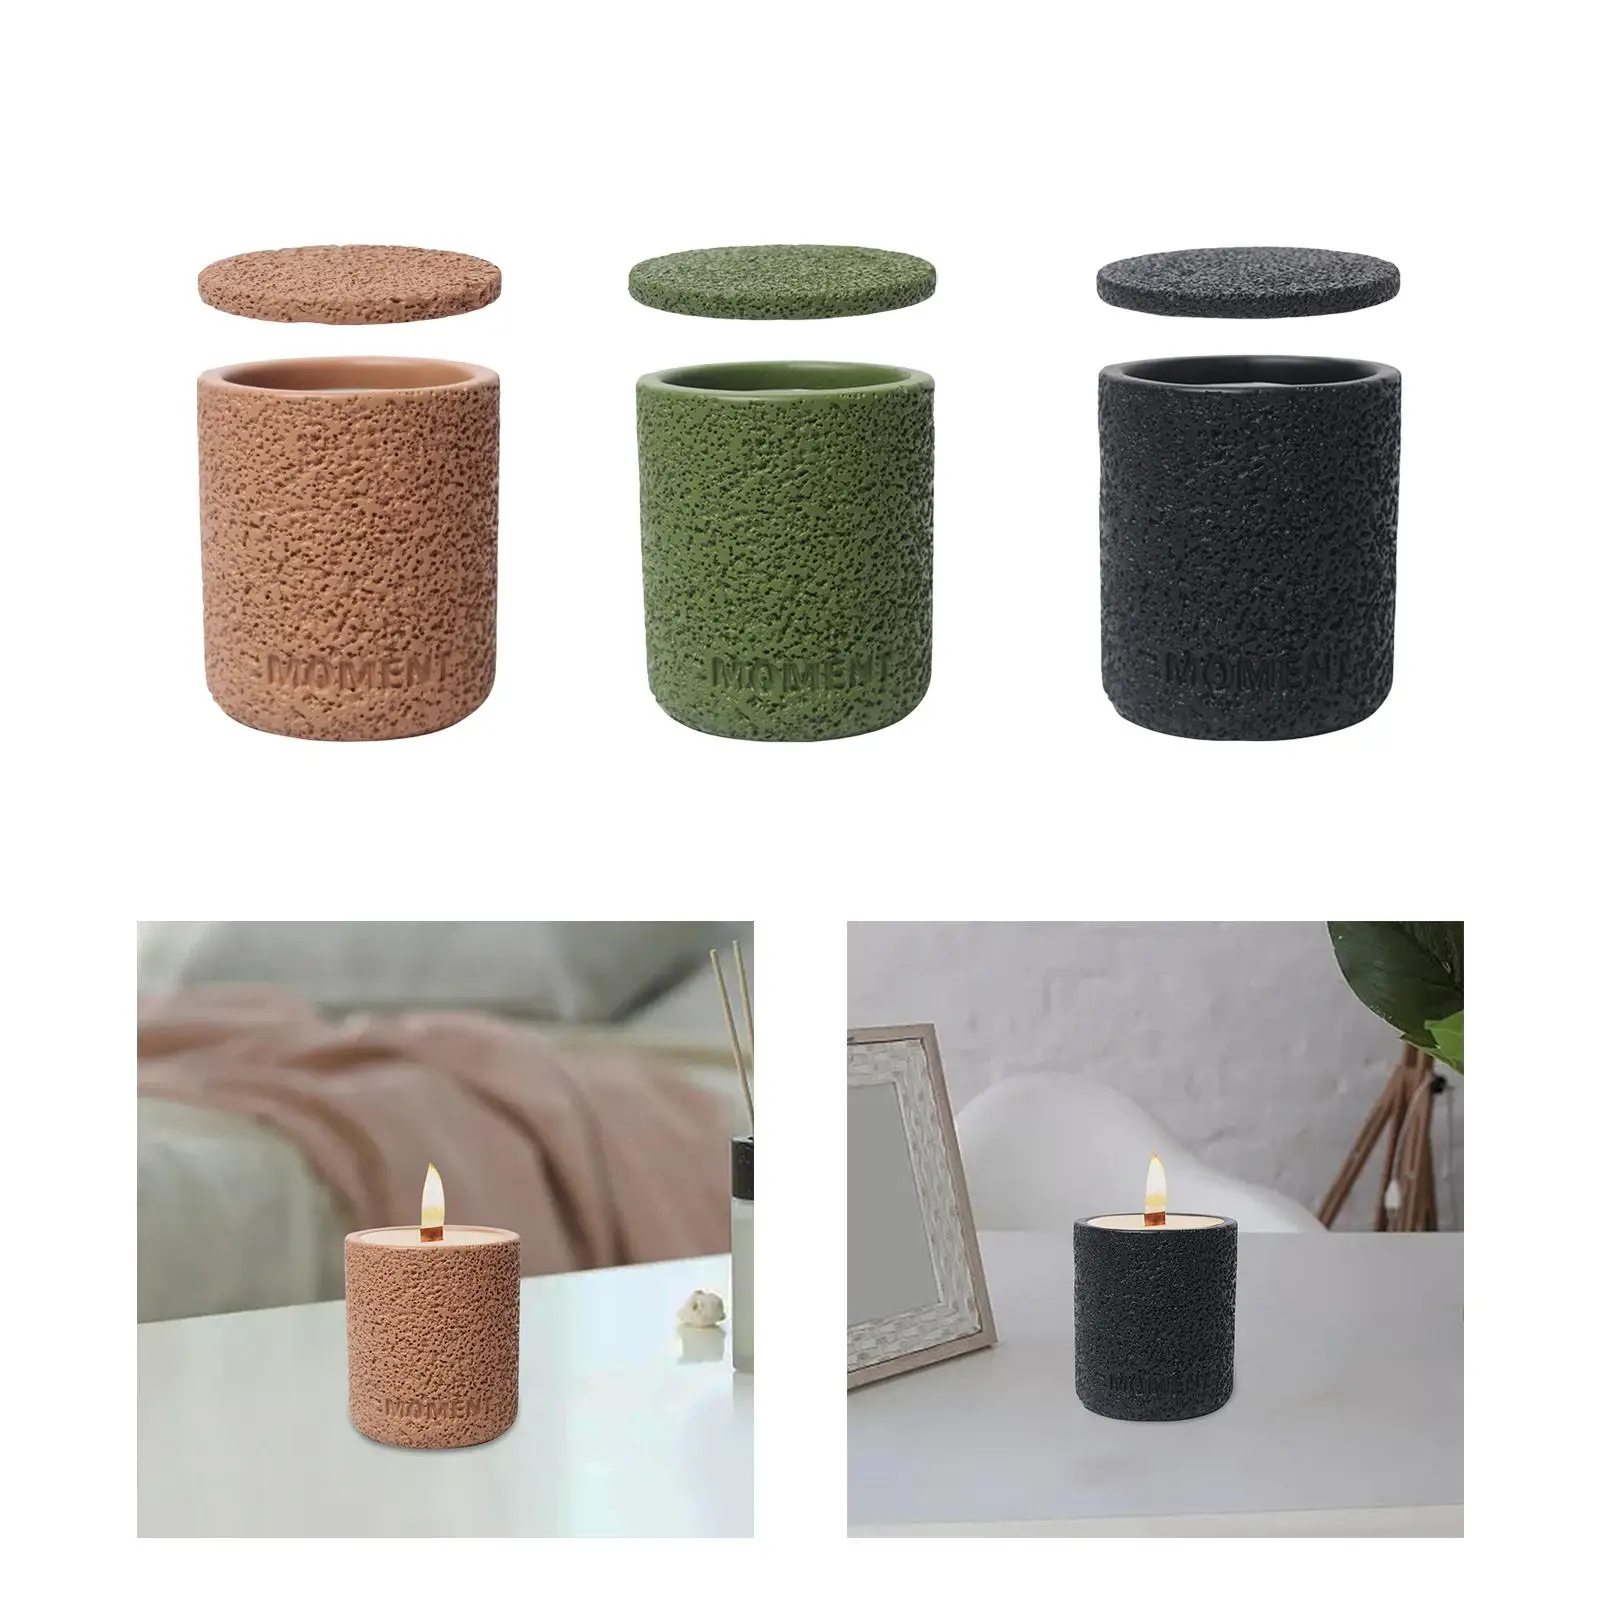 Votive Candle Holders Table Centerpieces Living Room Small Container for Candle Making Housewarming Gift Tealight Candlestick